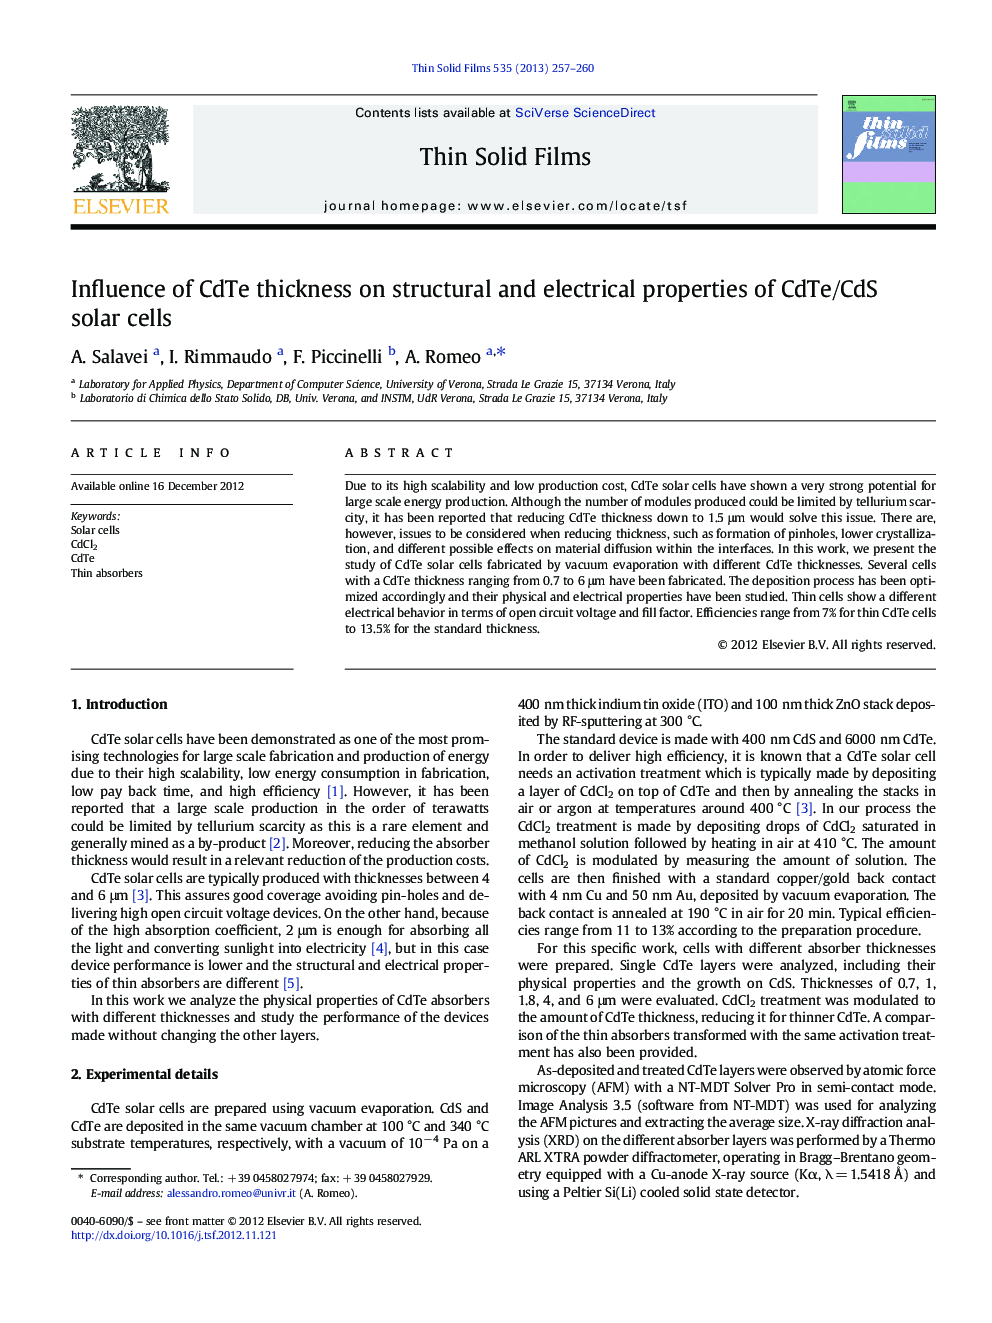 Influence of CdTe thickness on structural and electrical properties of CdTe/CdS solar cells